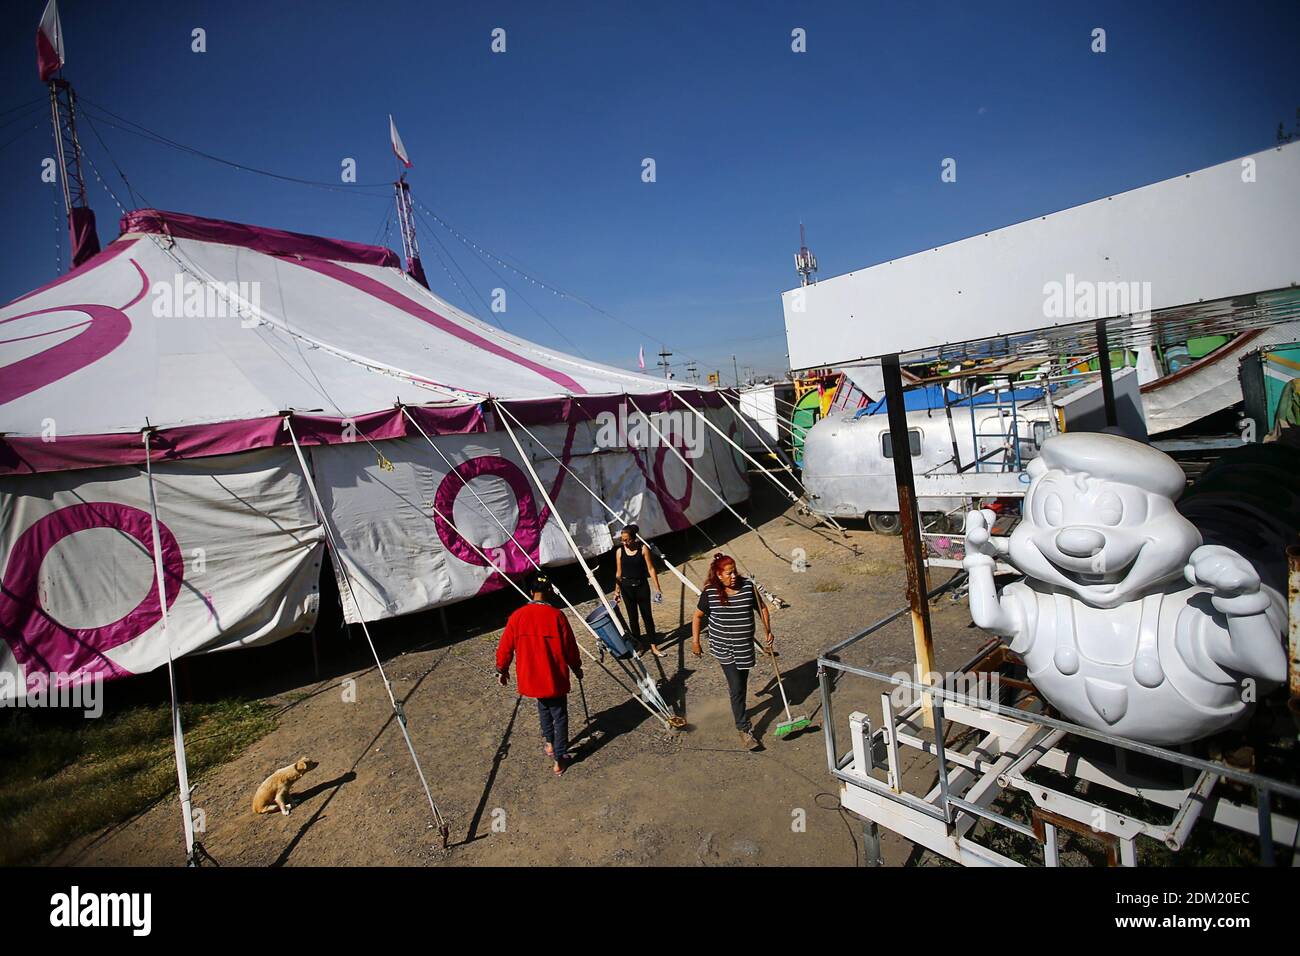 Circus artists clean outside a tent of the family-owned Glez Family Circus which has remained under lockdown since March due to a high coronavirus disease (COVID-19) infection rate, in Mexico City, Mexico October 7, 2020. Picture taken October 7, 2020. REUTERS/Edgard Garrido Stock Photo